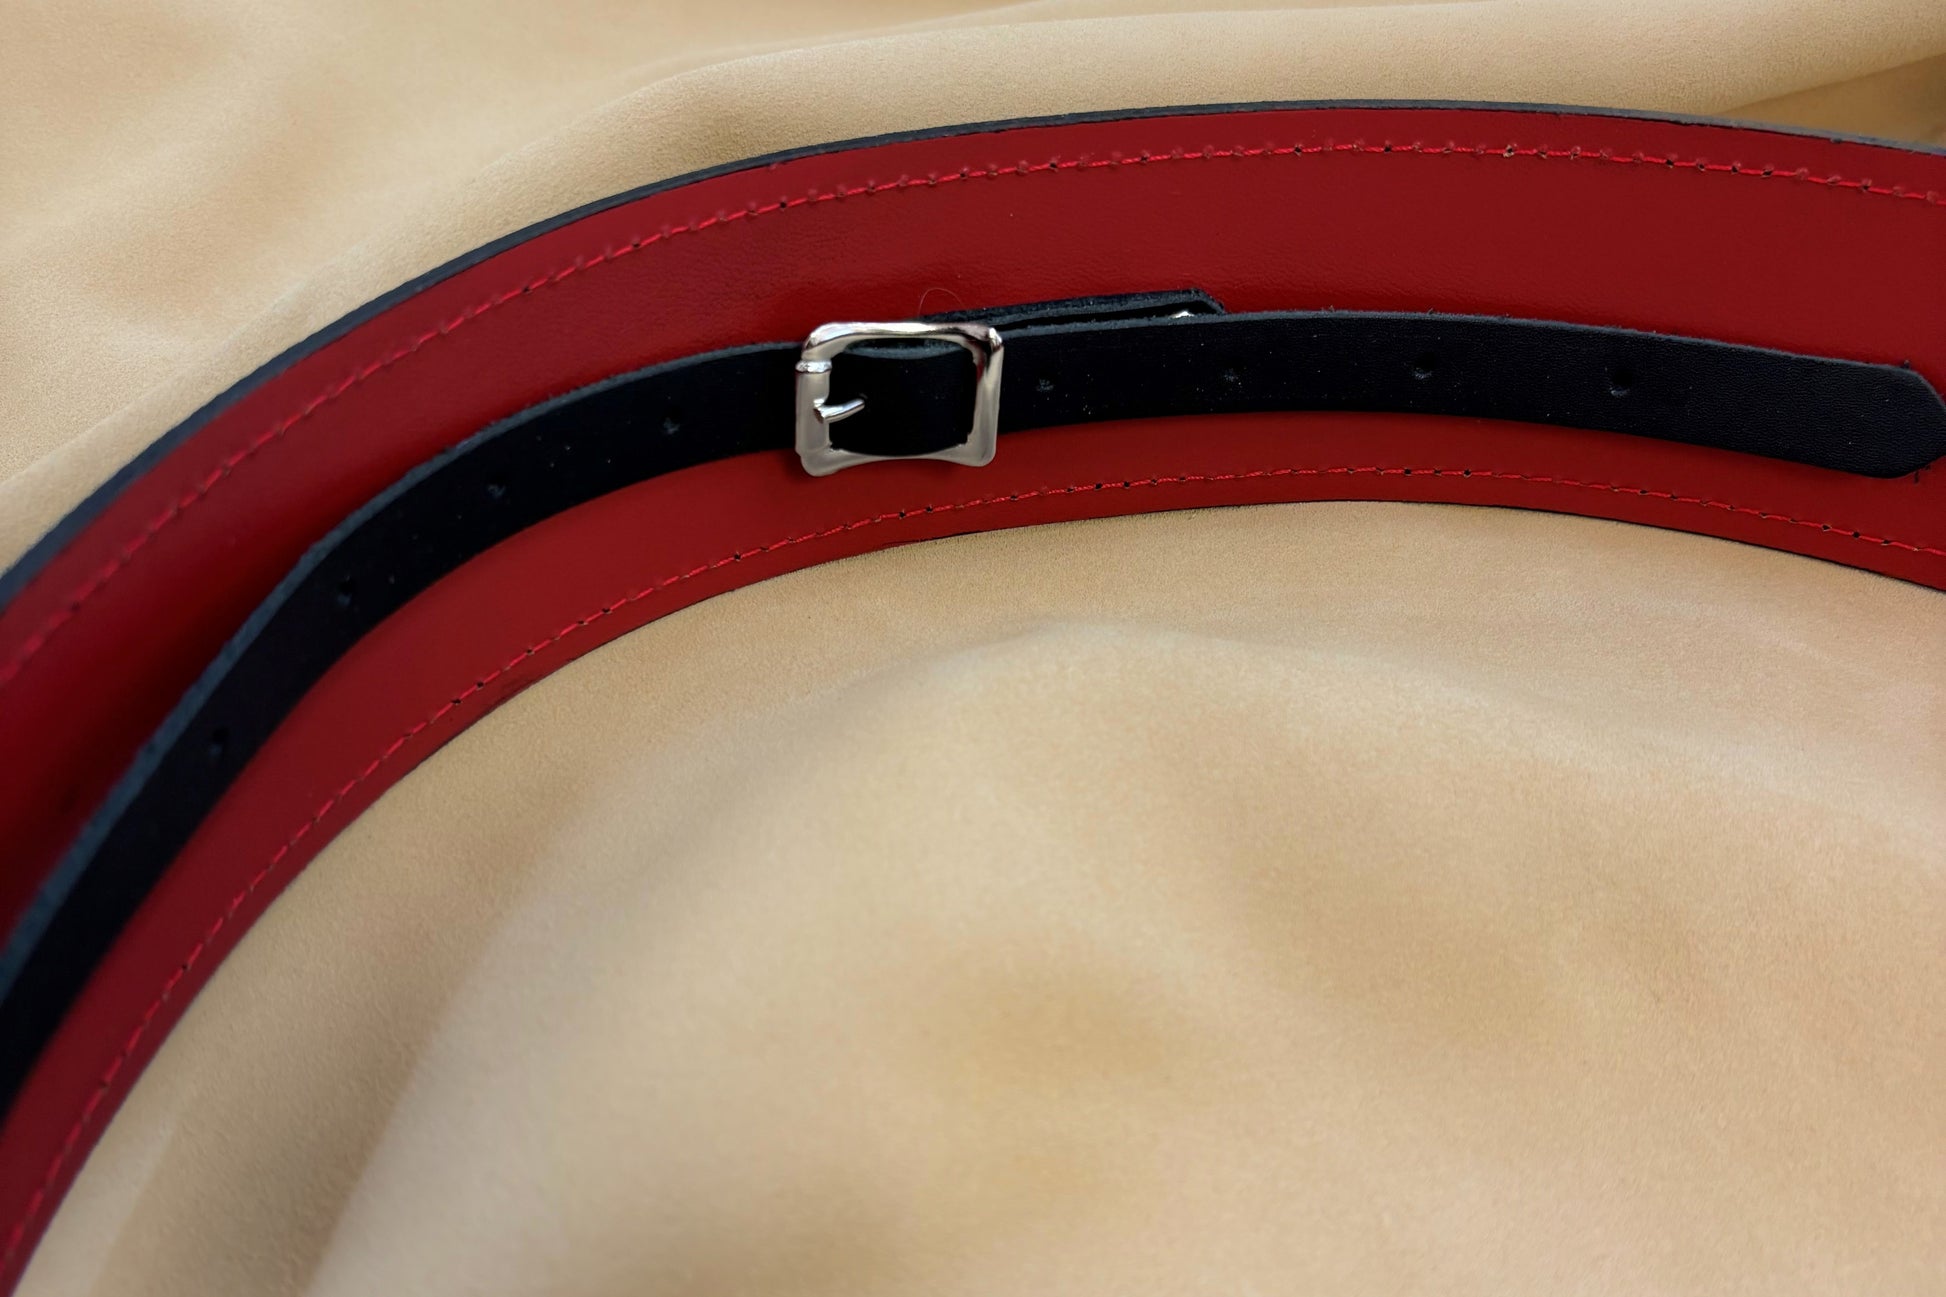 The outer leather is black and has a pebbled texture while the liner leather is smooth and red. 